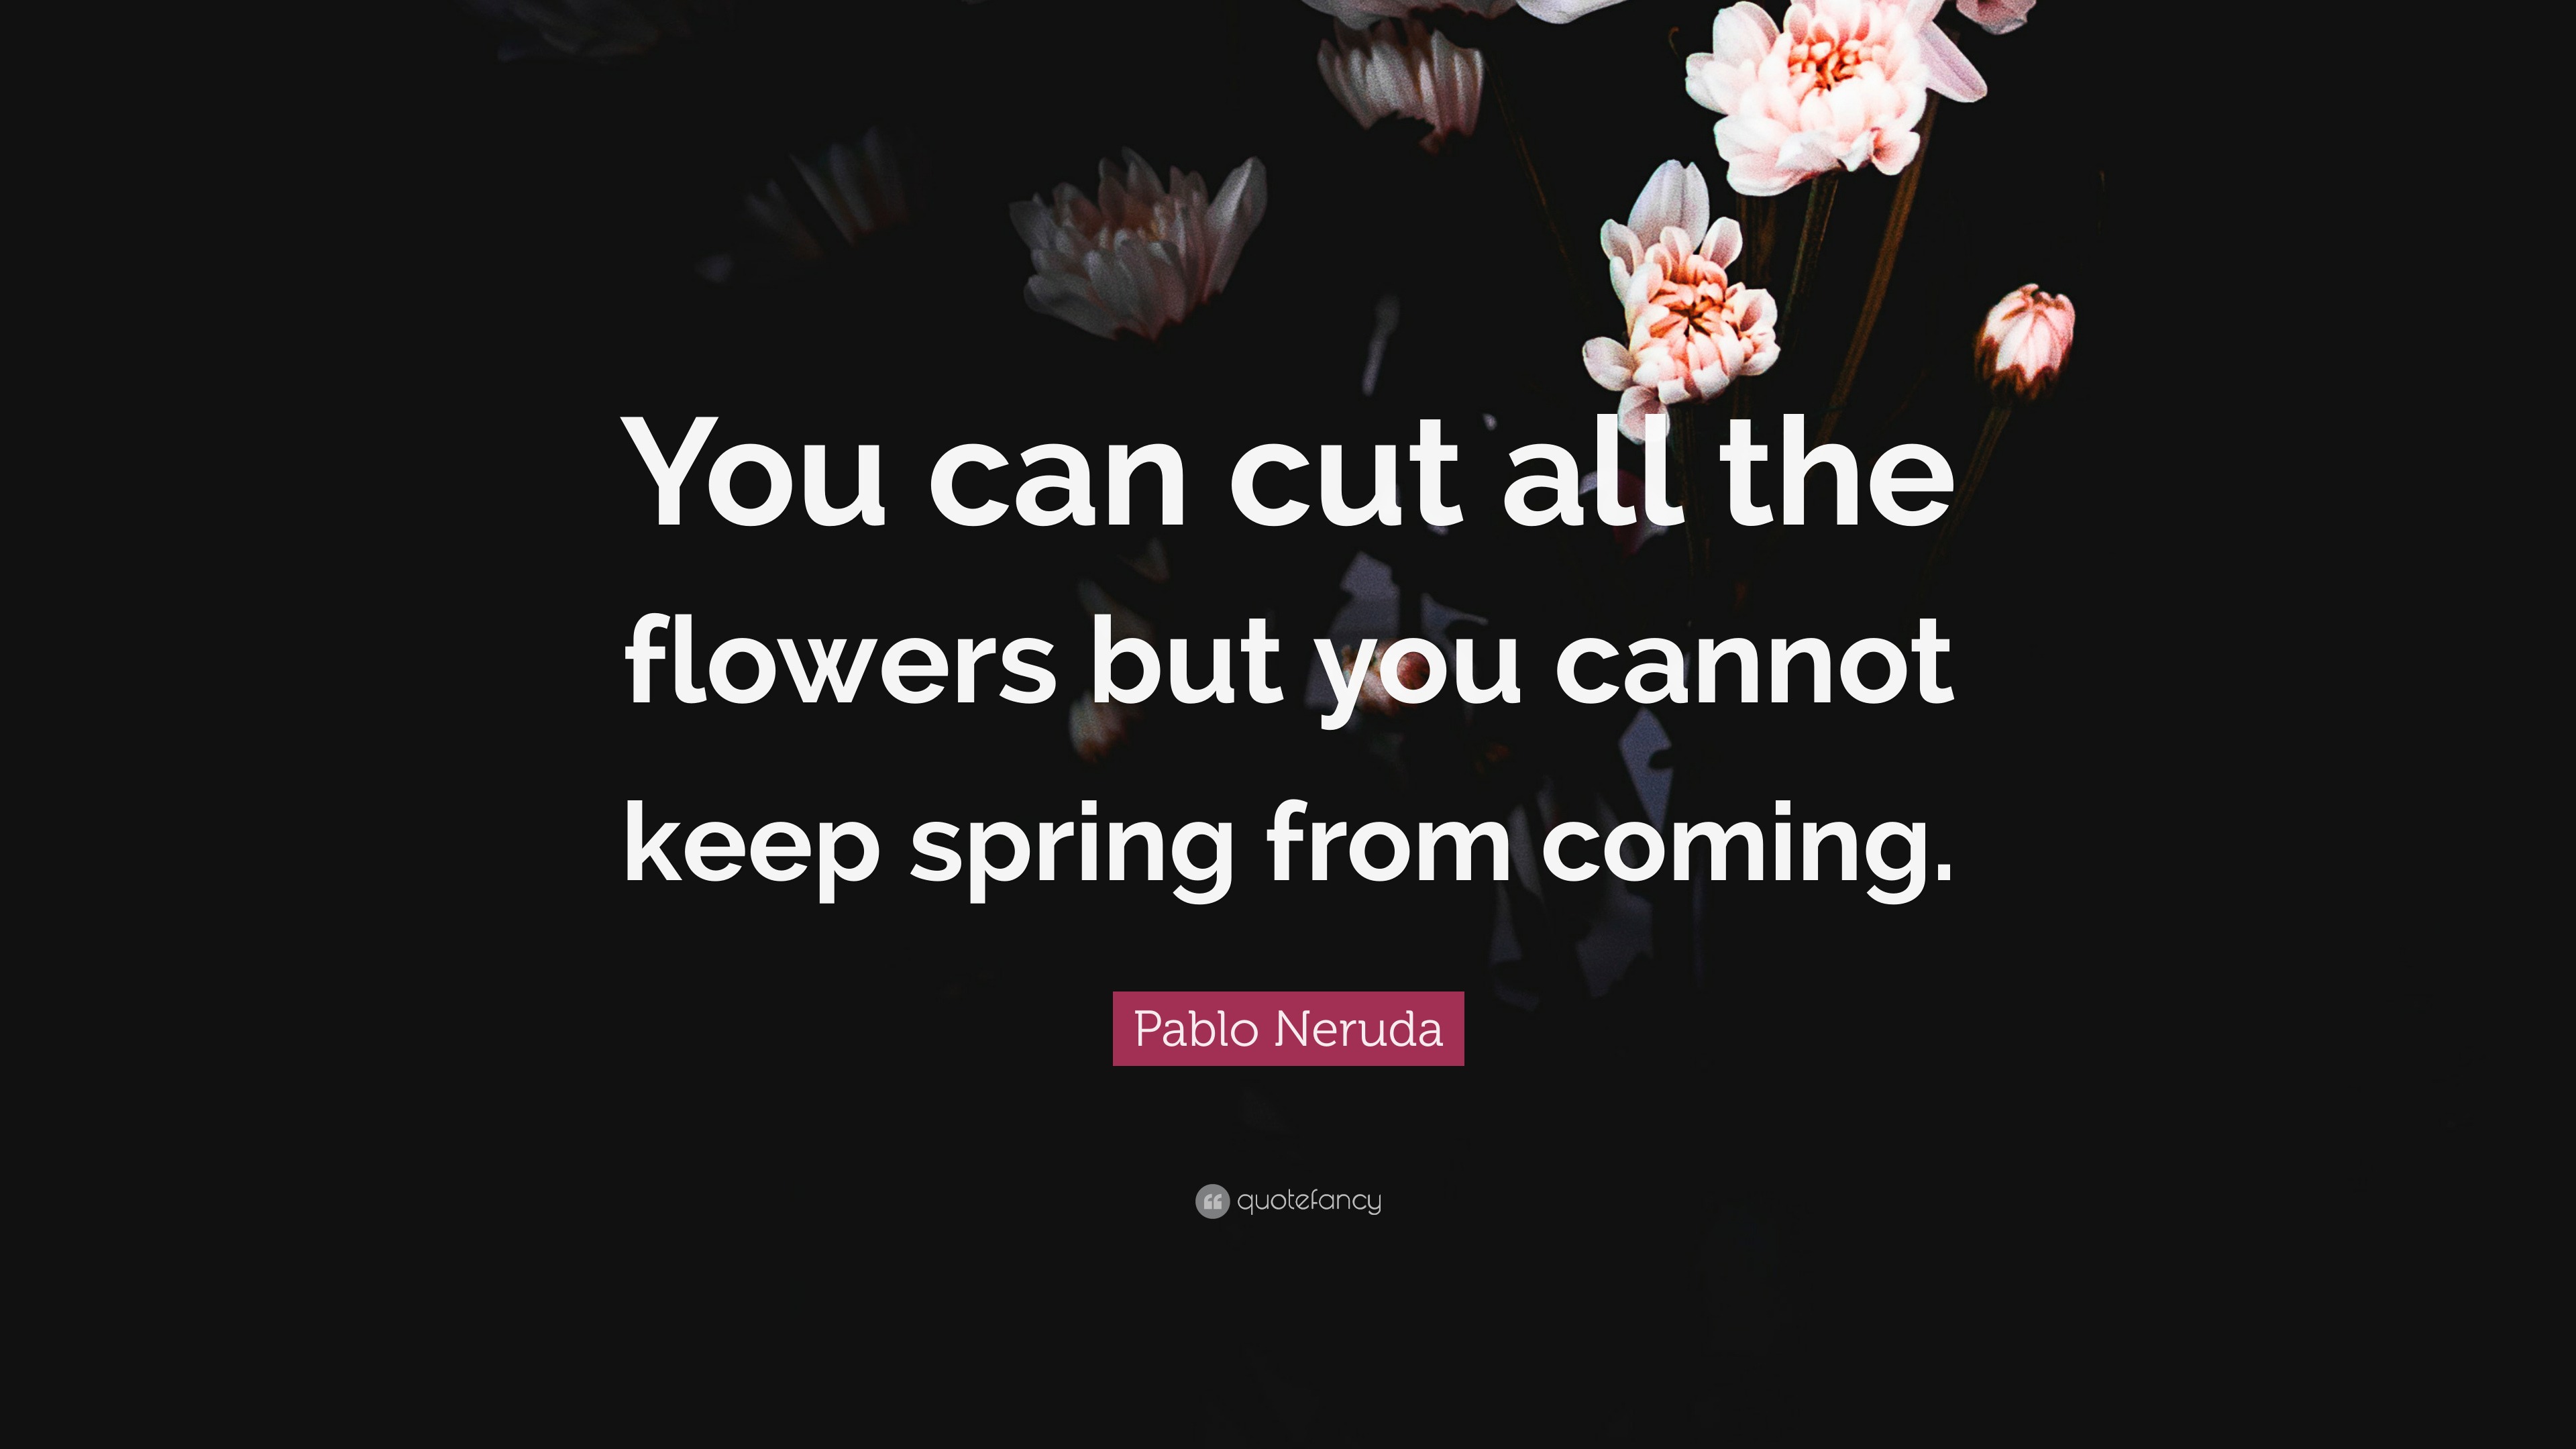 Cannot without you. Pablo Neruda quotes. Flowers quotes. You can чёрный цвет.